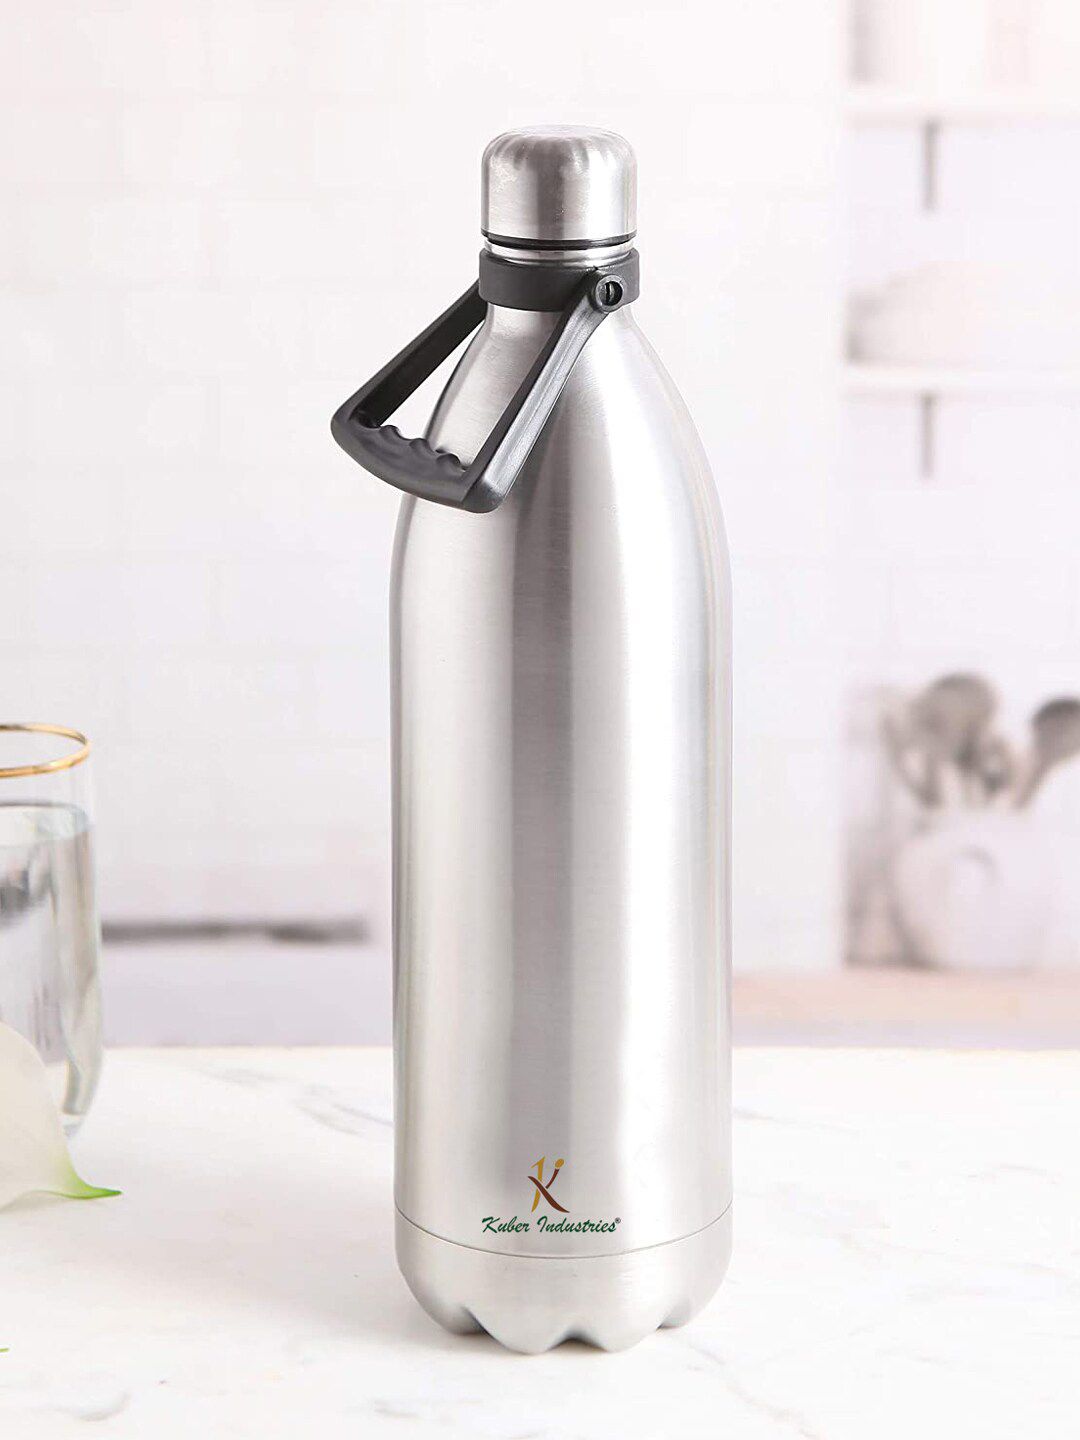 Kuber Industries Silver-Toned & Black Solid Stainless Steel 24 Hours Plus Hot & Cold Water Bottle 1.8 l Price in India